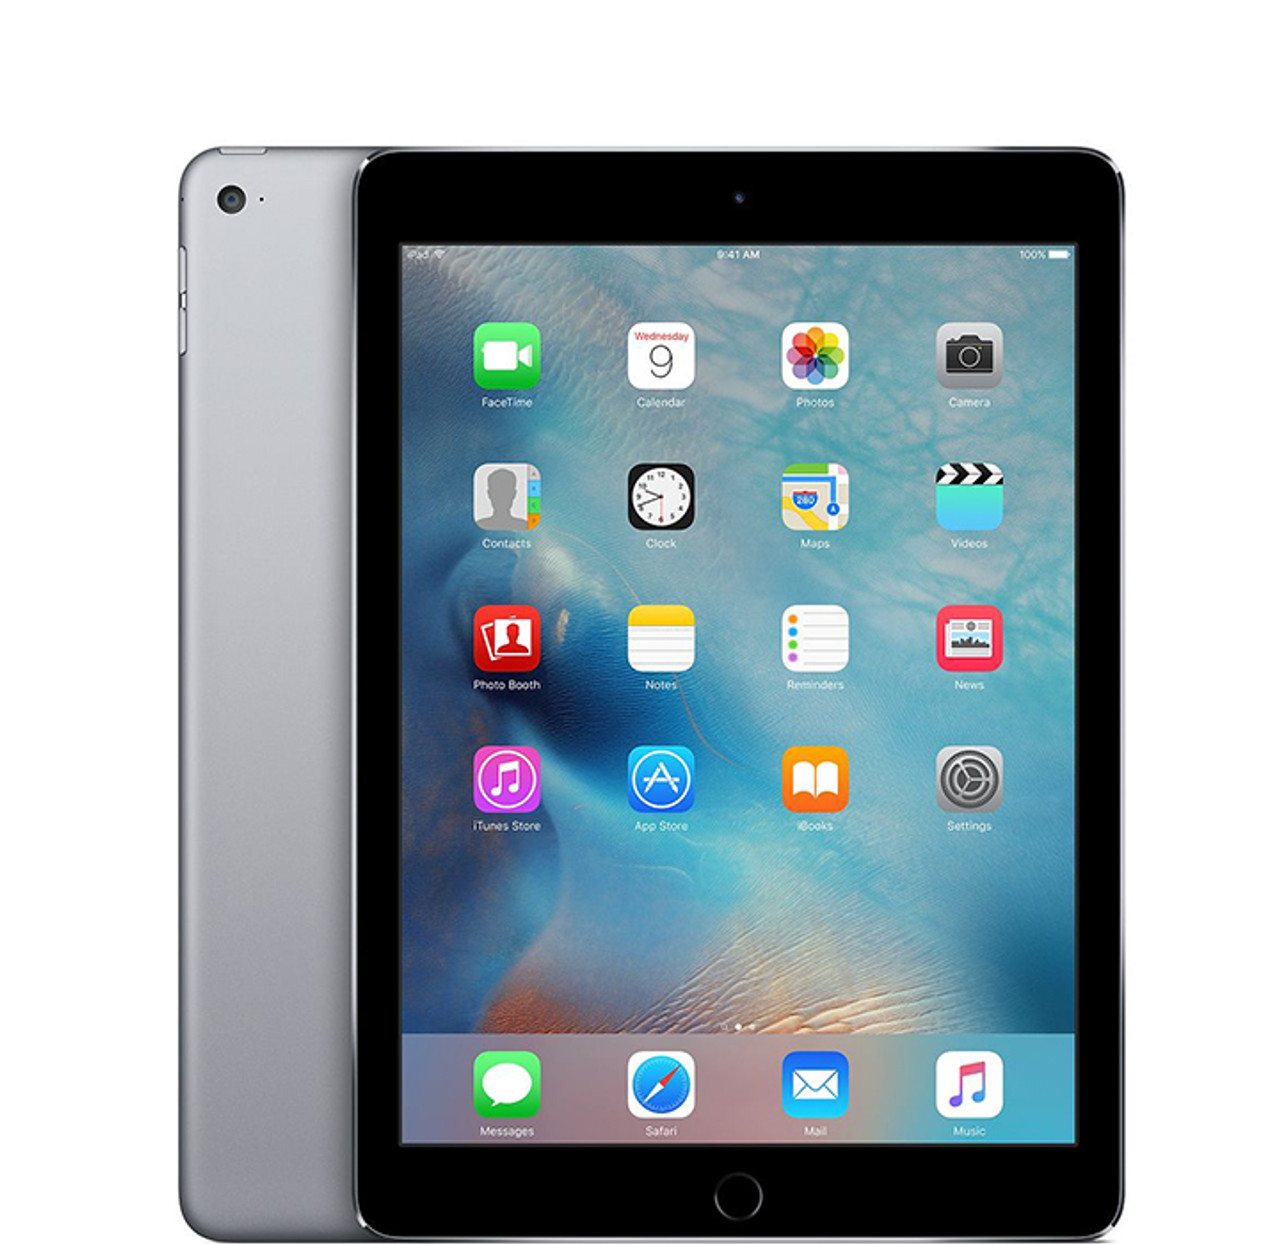 Apple iPad Air 2 Retina Bundle with Case and Screen Protector product image